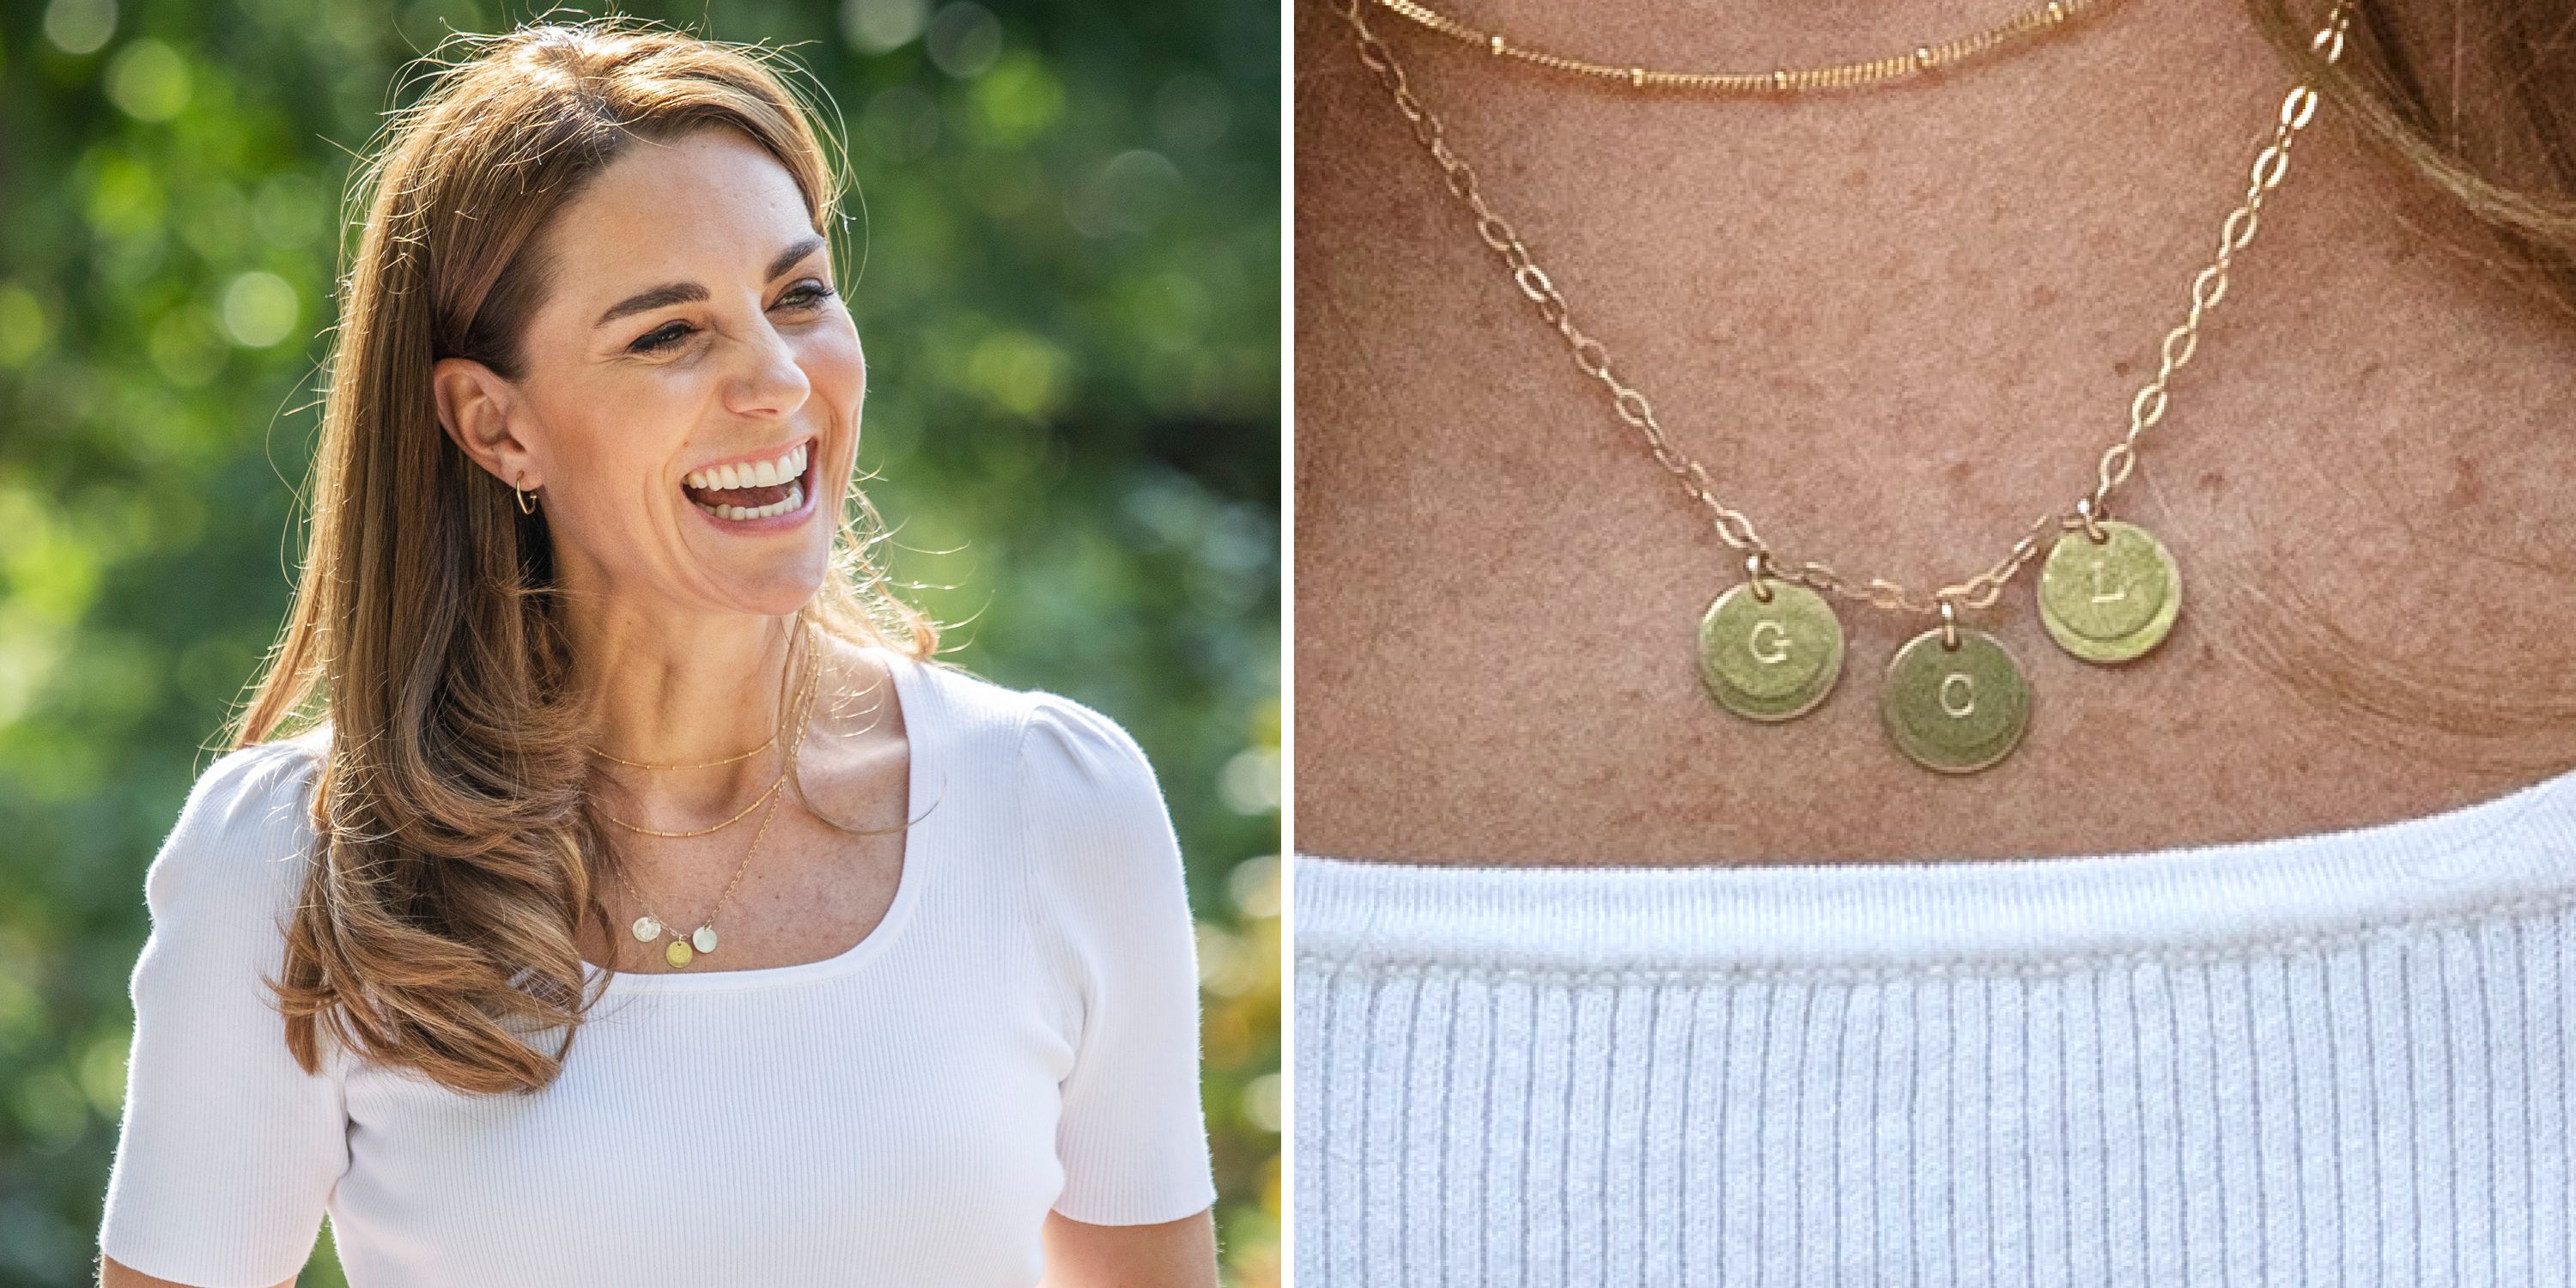 Necklace with Kids' Initials: A Thoughtful and Personalized Gift –  ChicSparklers.com